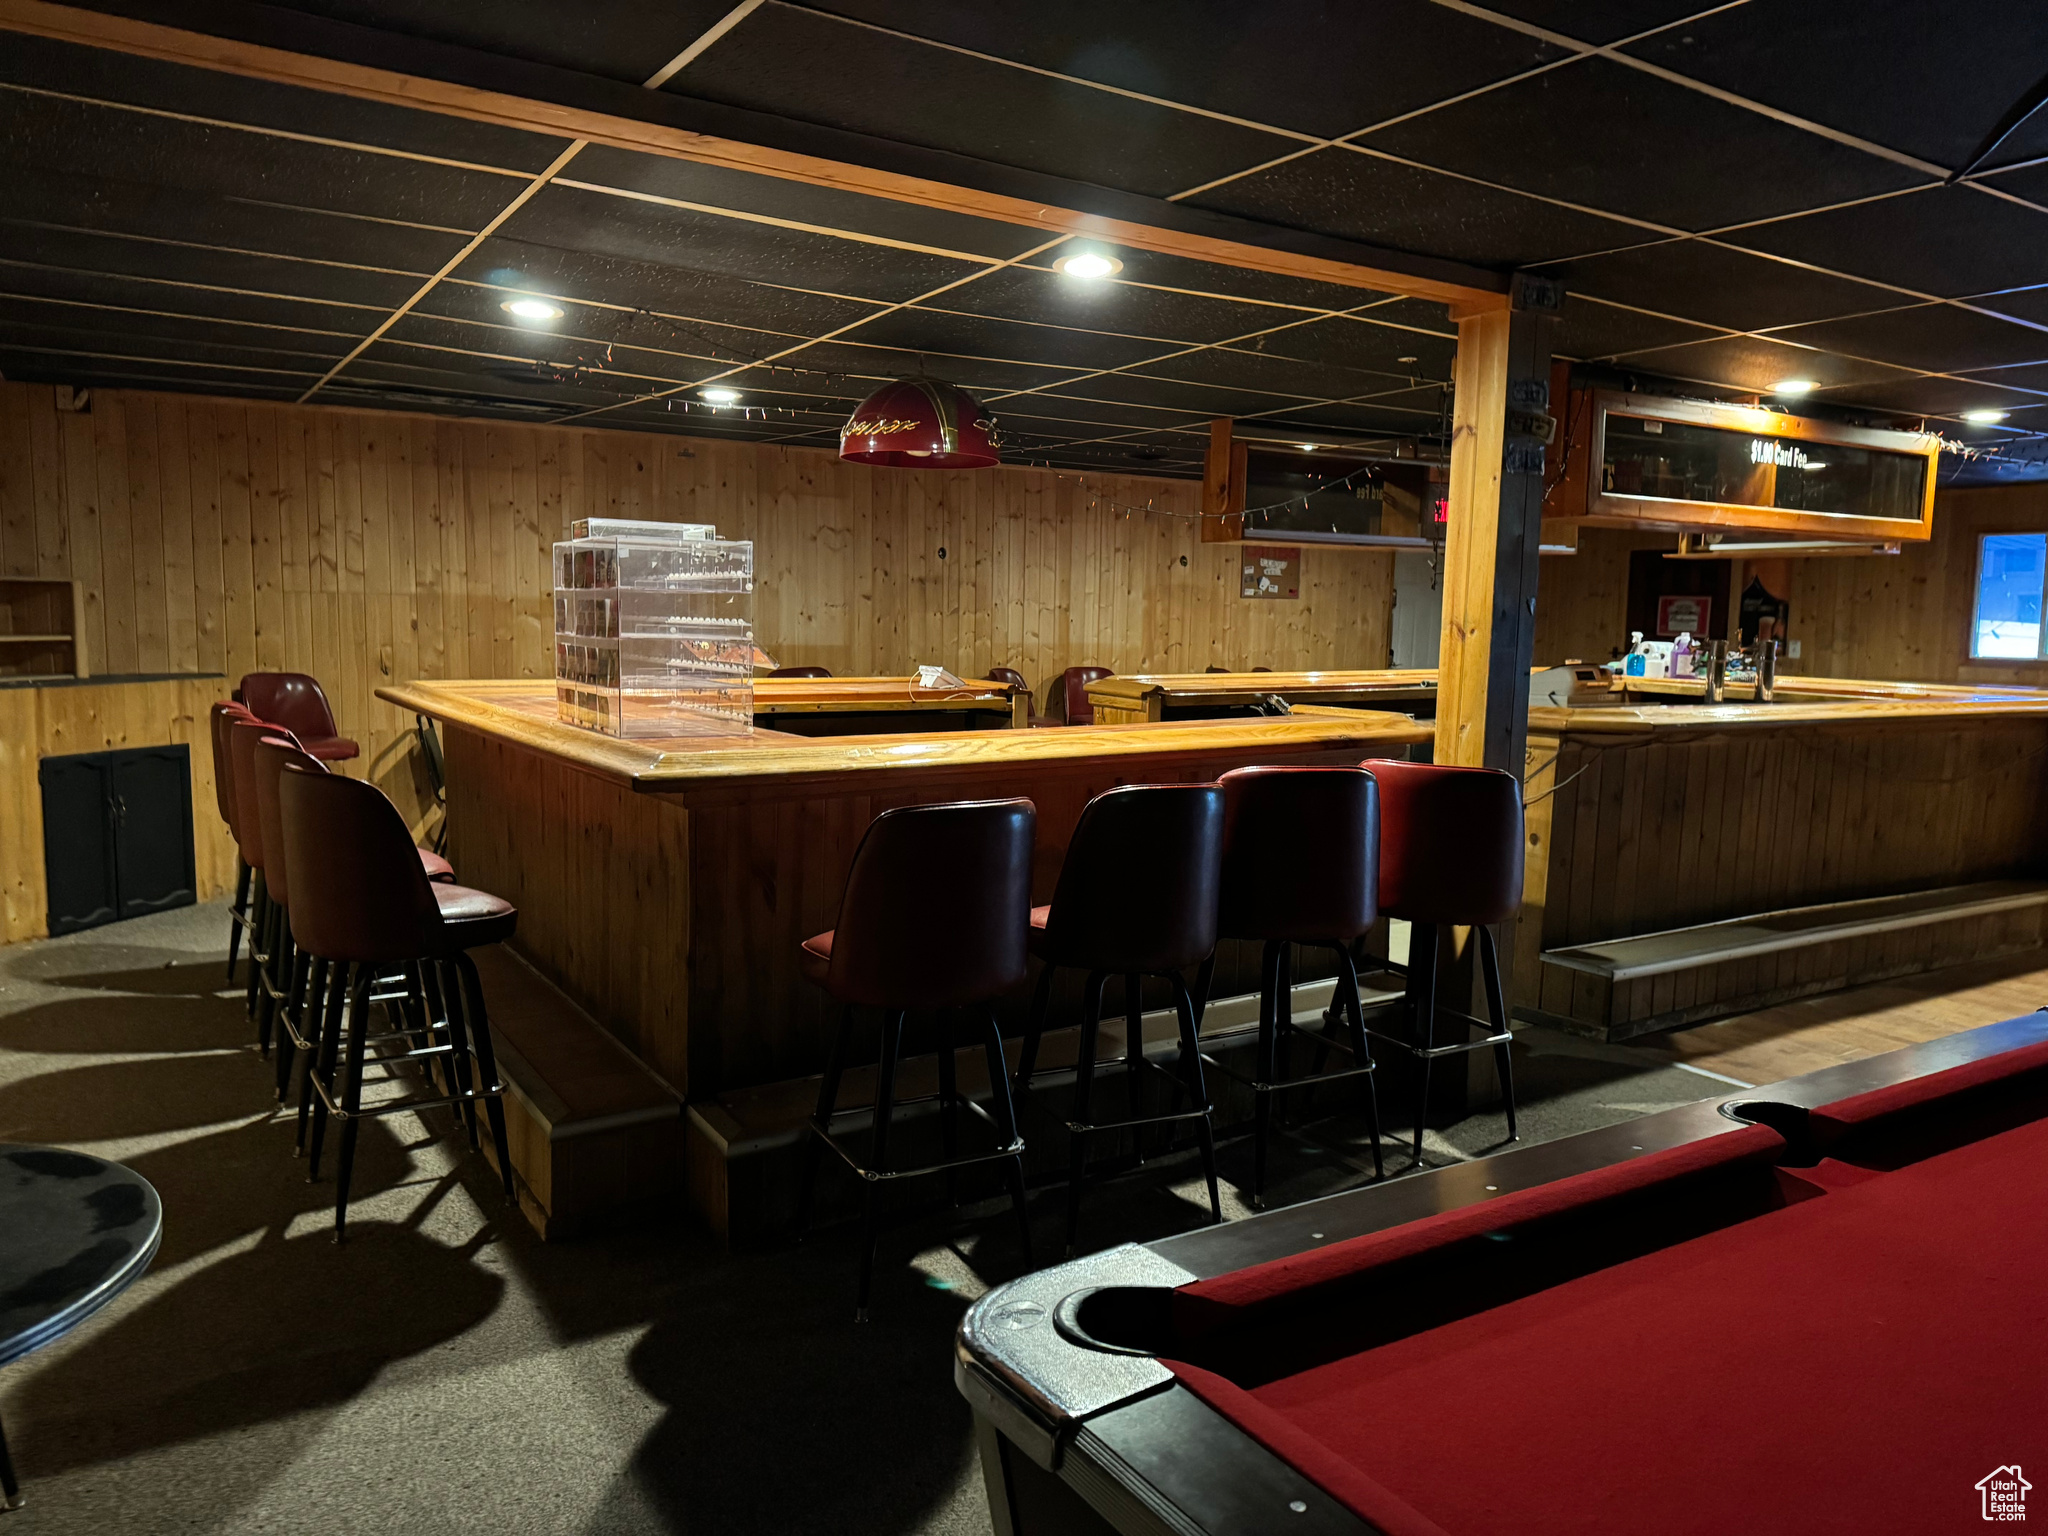 Bar with a paneled ceiling, pool table, and wooden counters